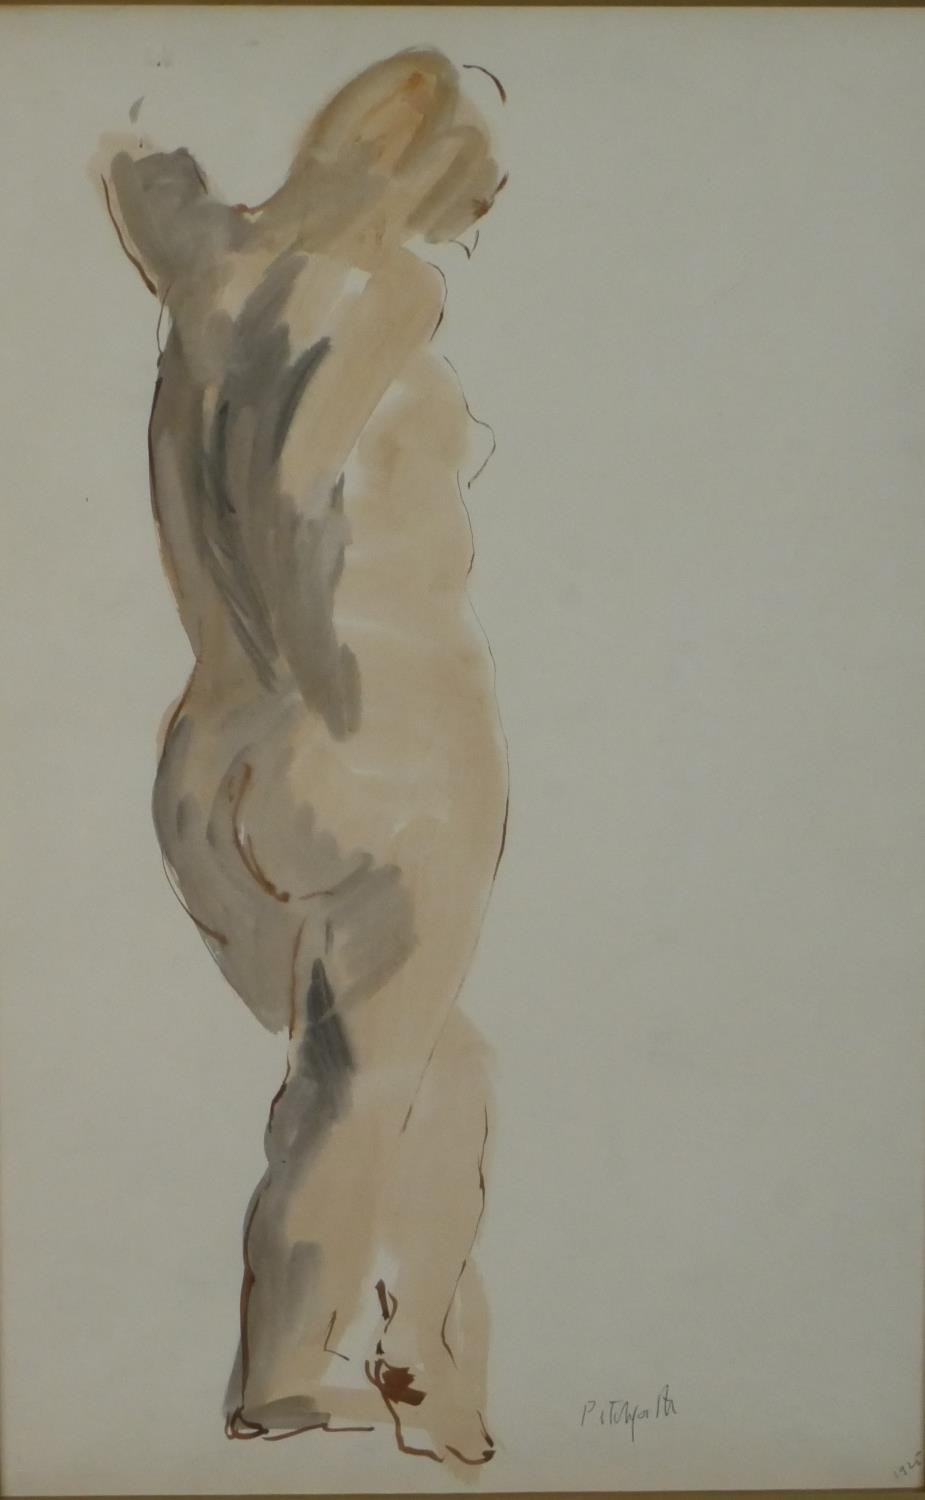 Roland Vivian Pitchforth (1895 - 1982), nude female figure, watercolour, signed and label verso. H.